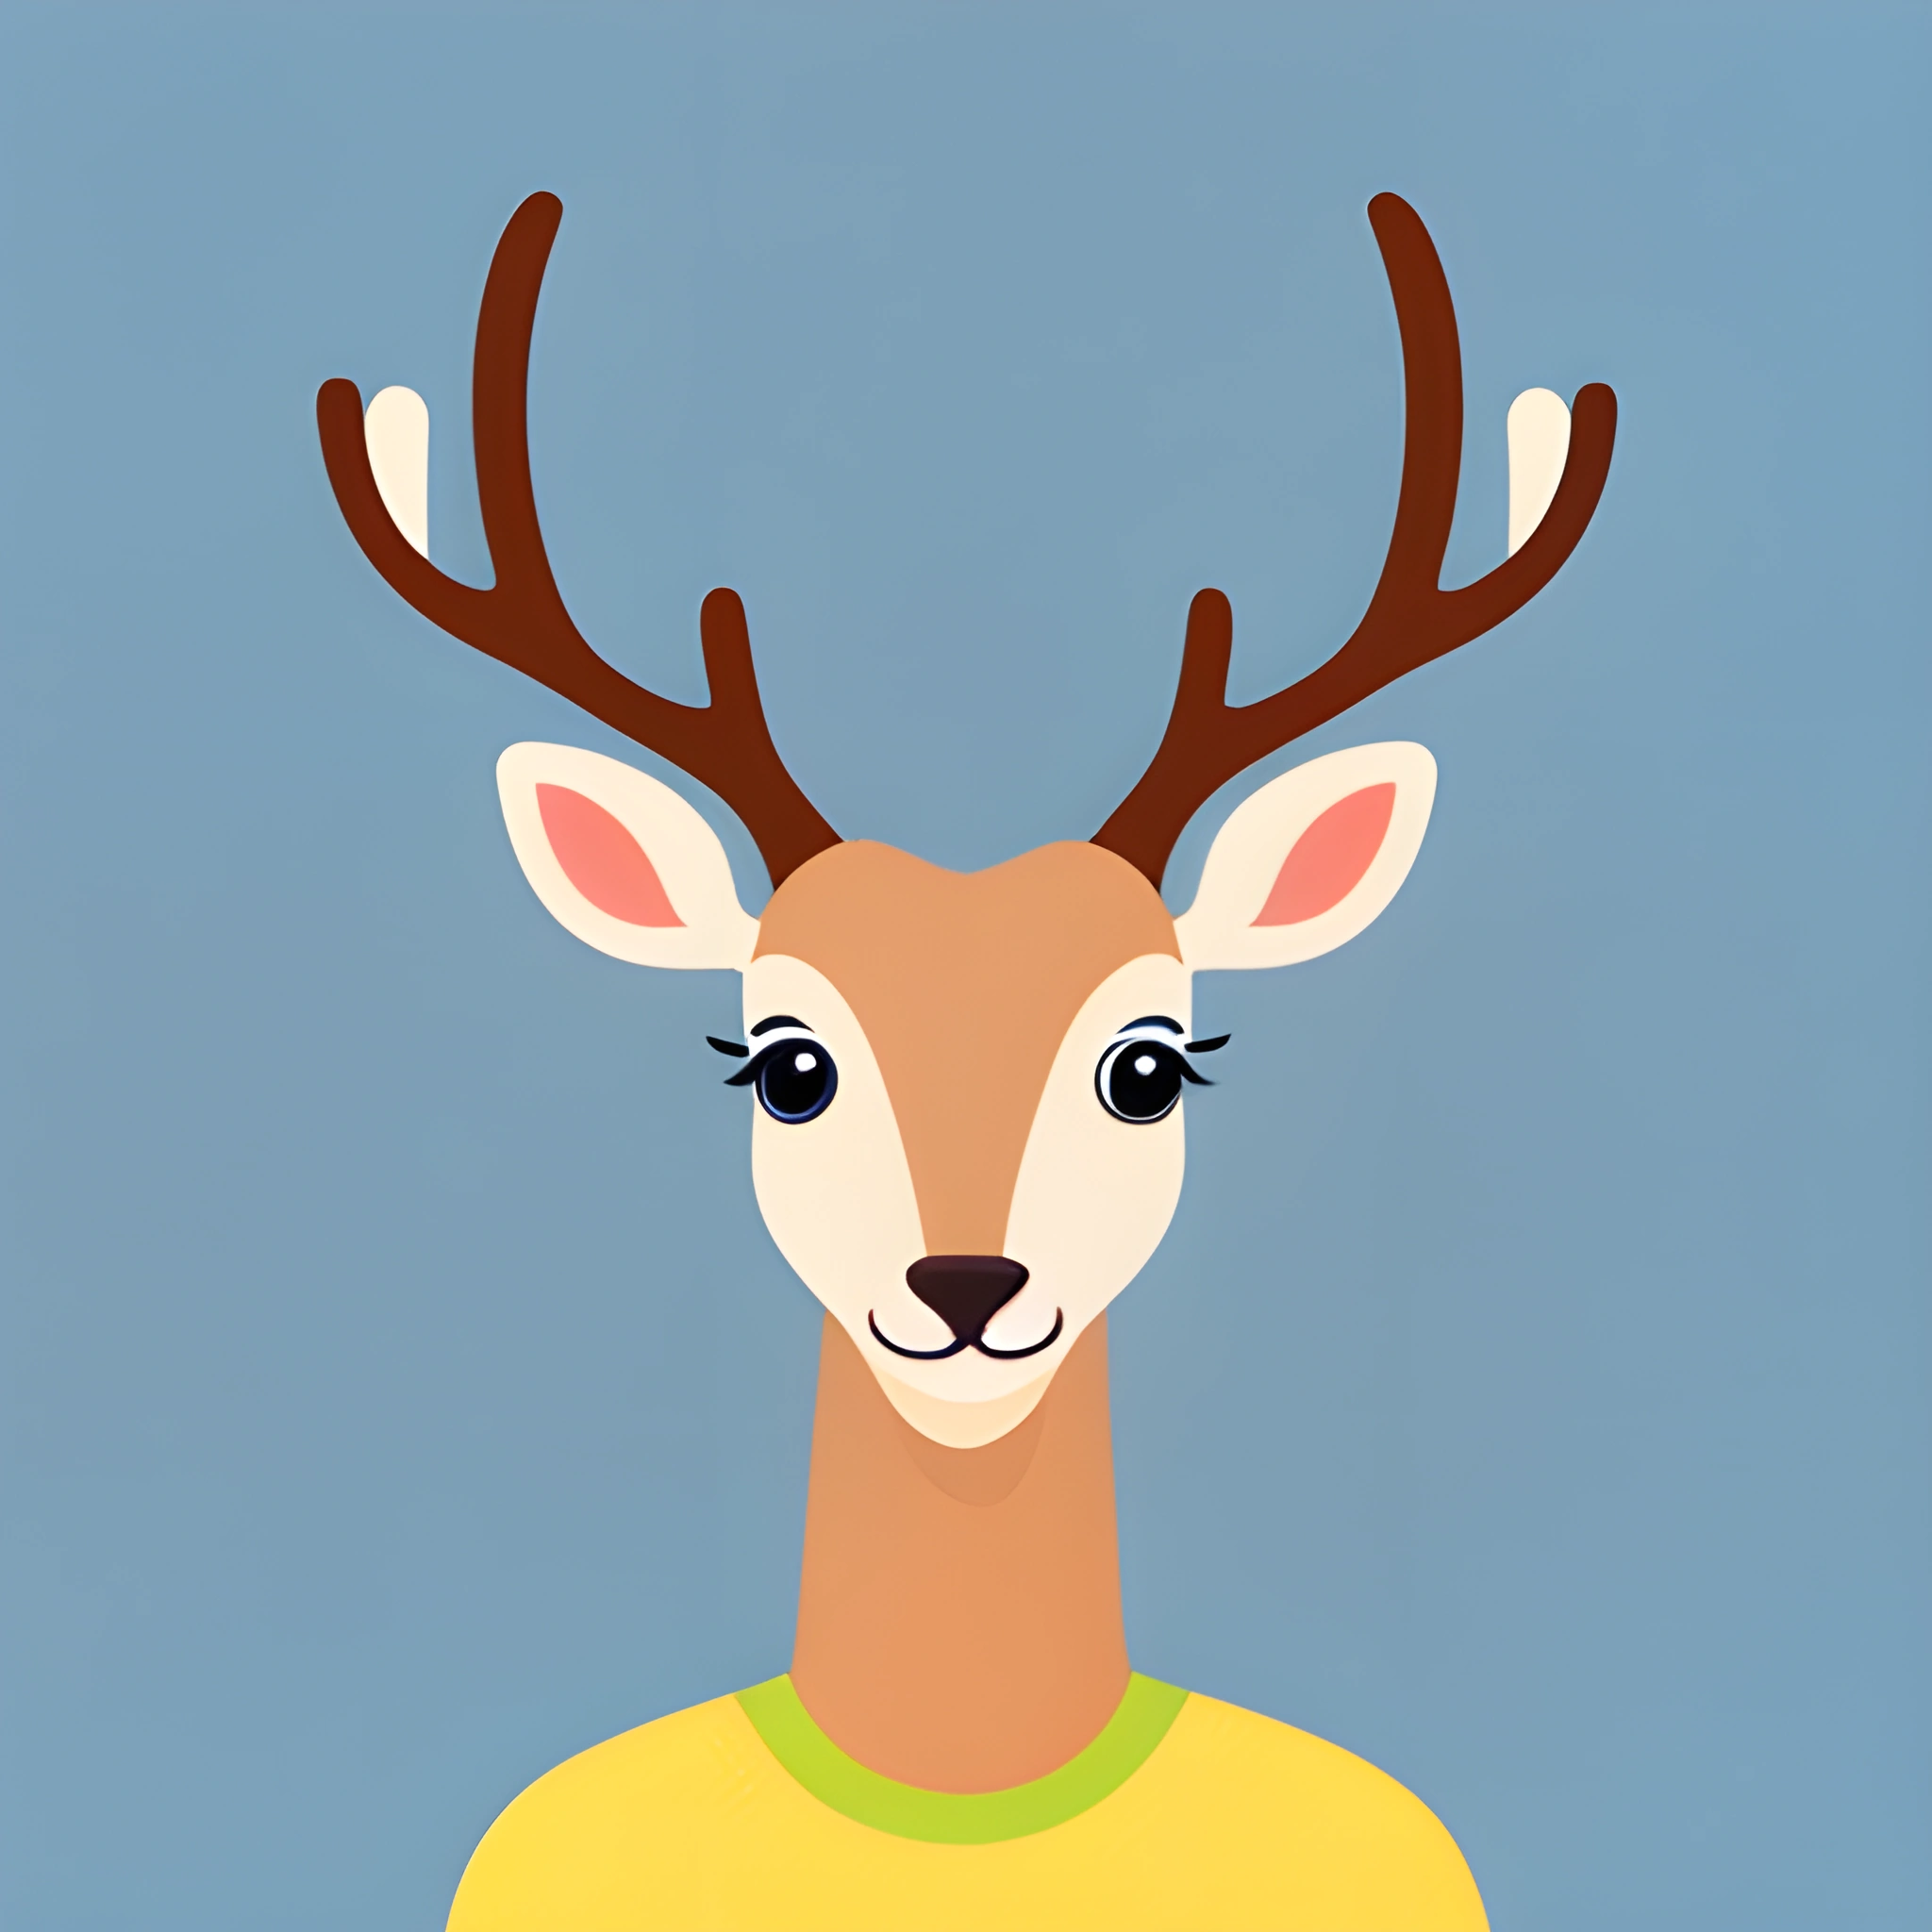 a deer with antlers on its head and a yellow shirt